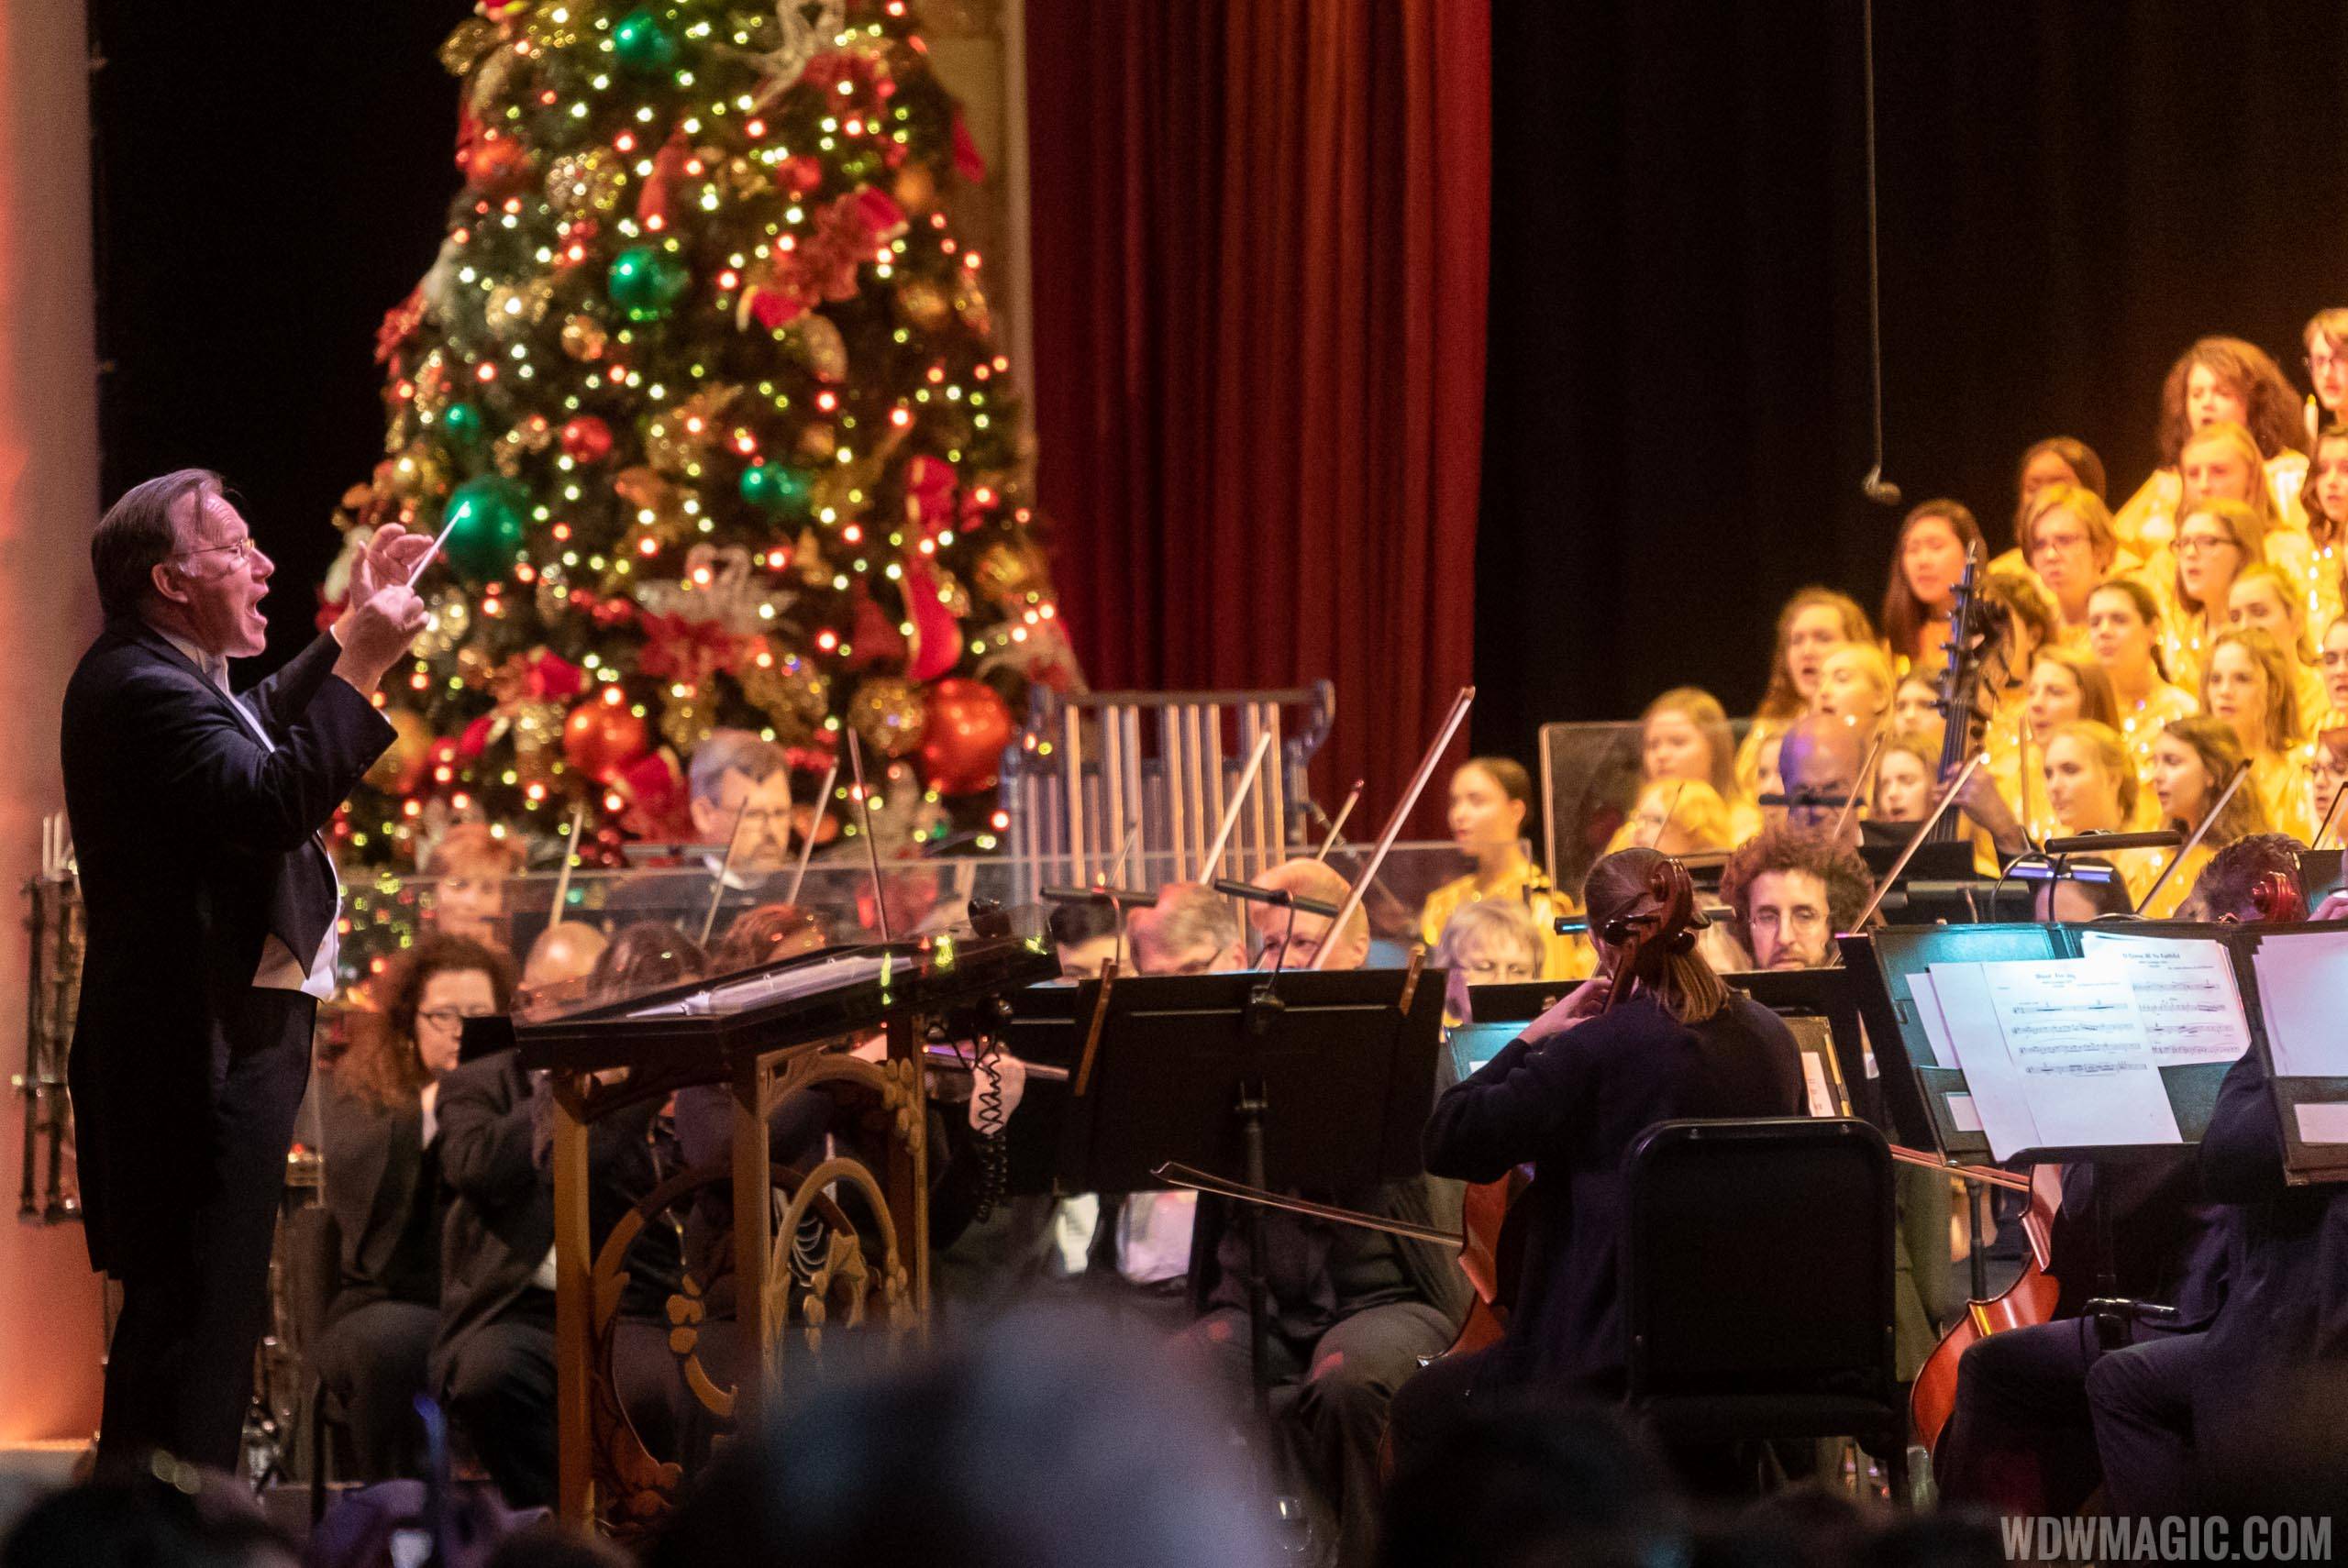 Candlelight Processional returns for 2021 after missing 2020